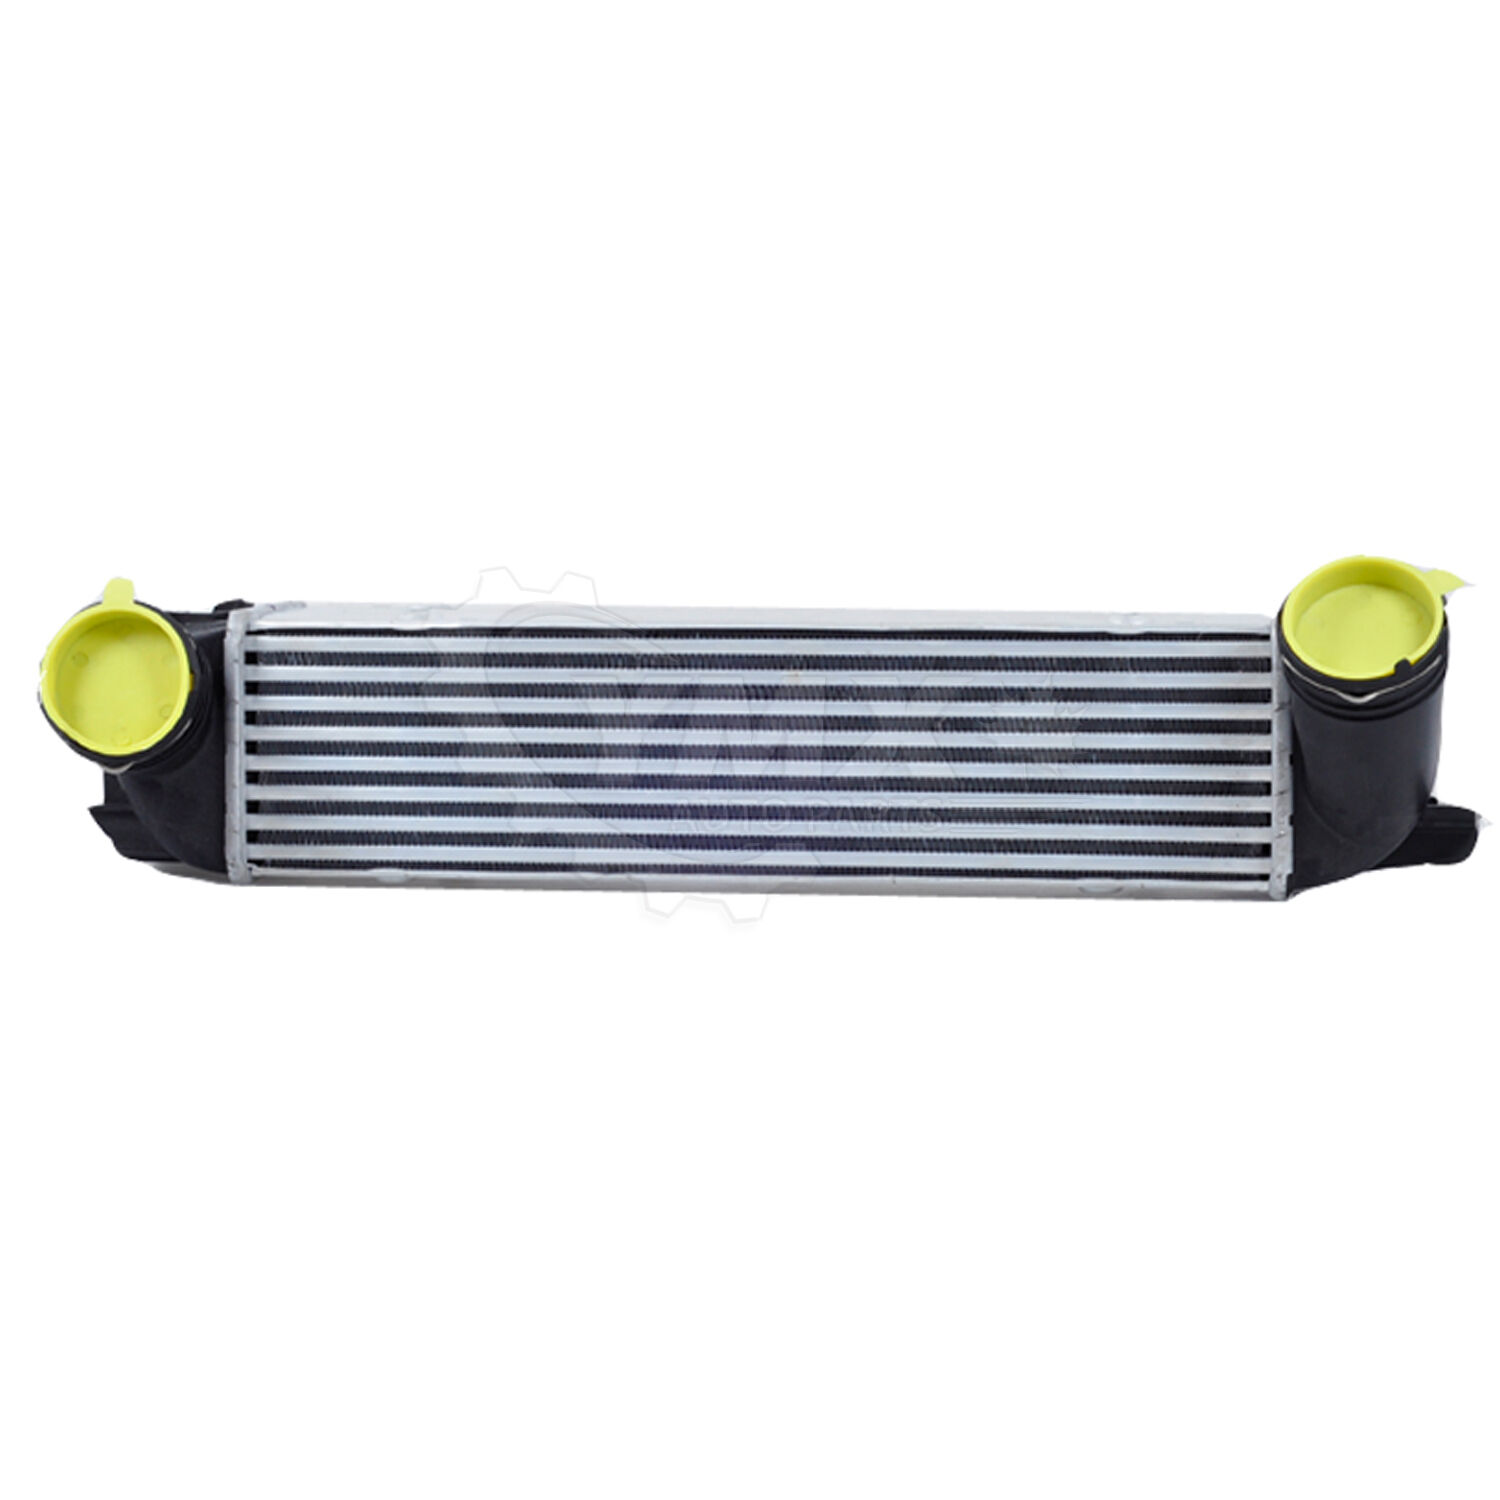 New Intercooler Charge Air Cooler Fits 2009 2010 2011 BMW 335d 3.0L Turbo